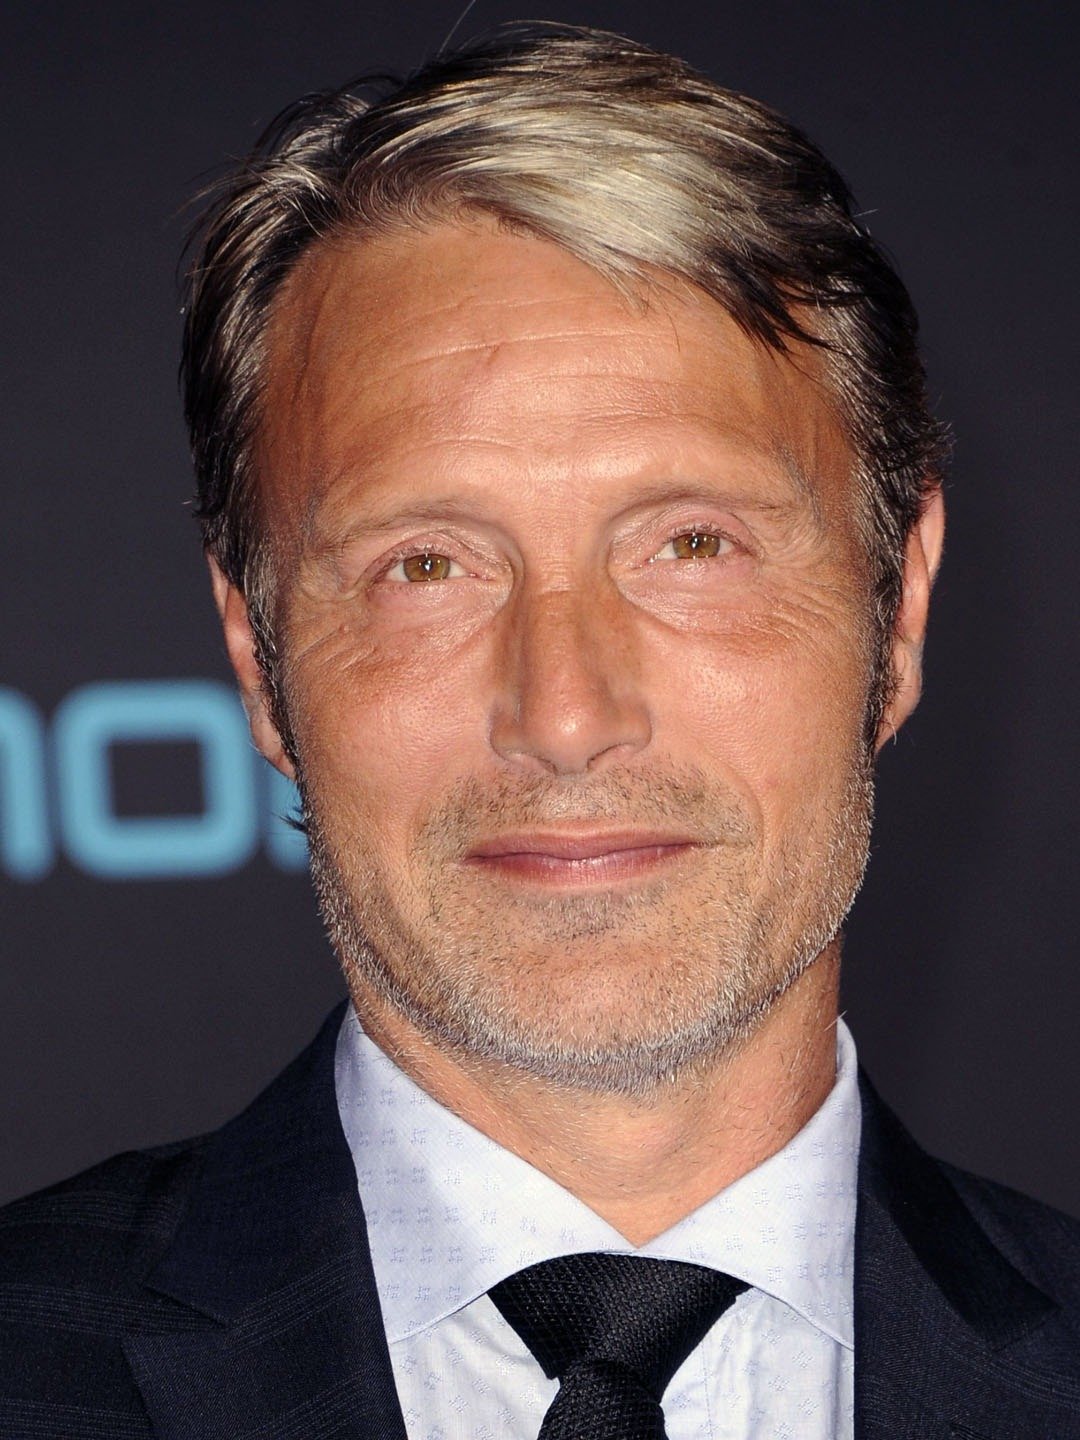 How tall is Mads Mikkelsen?